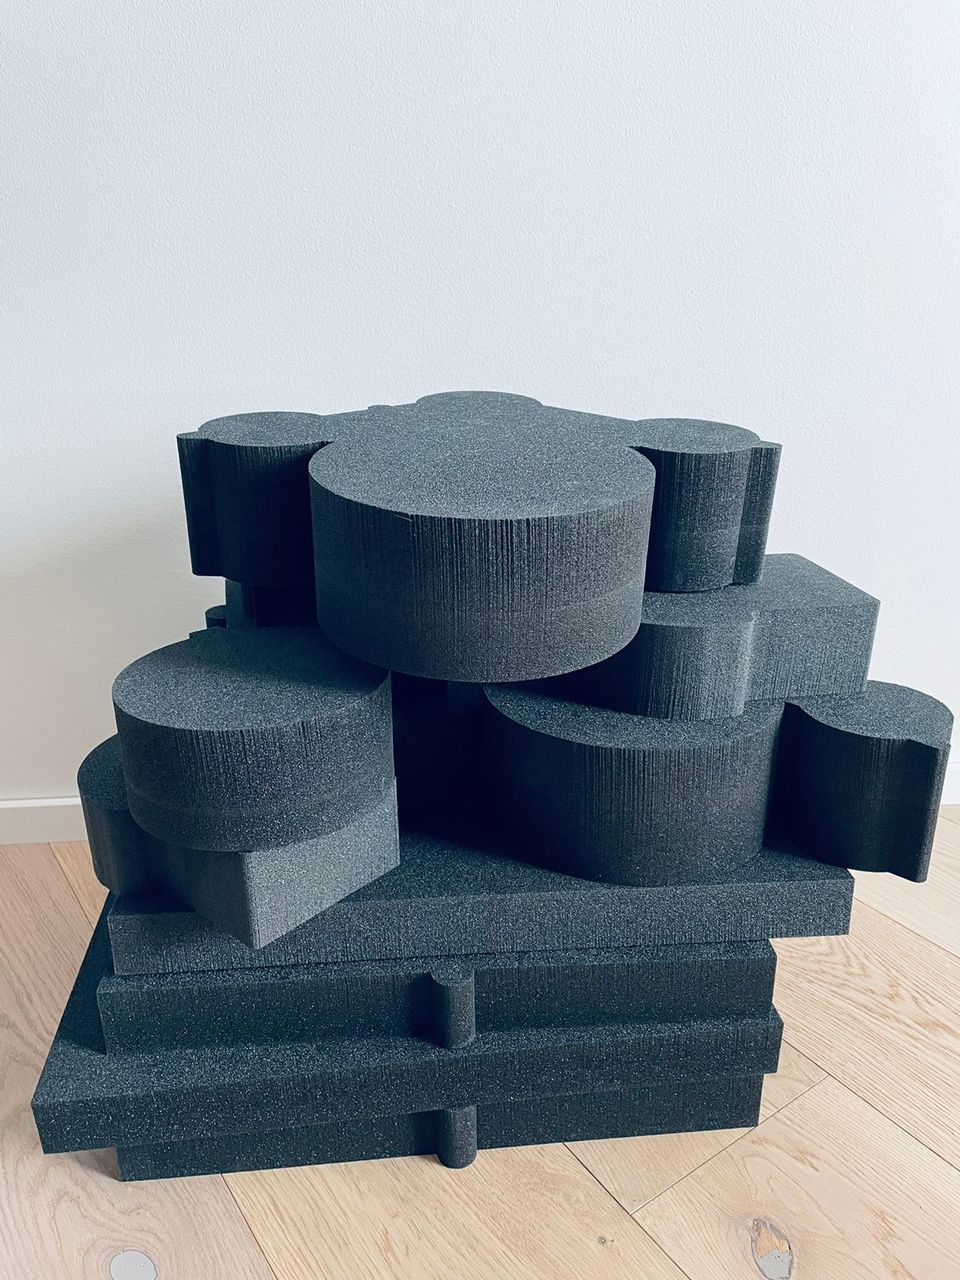 Thick and hard foam in black 1 kg